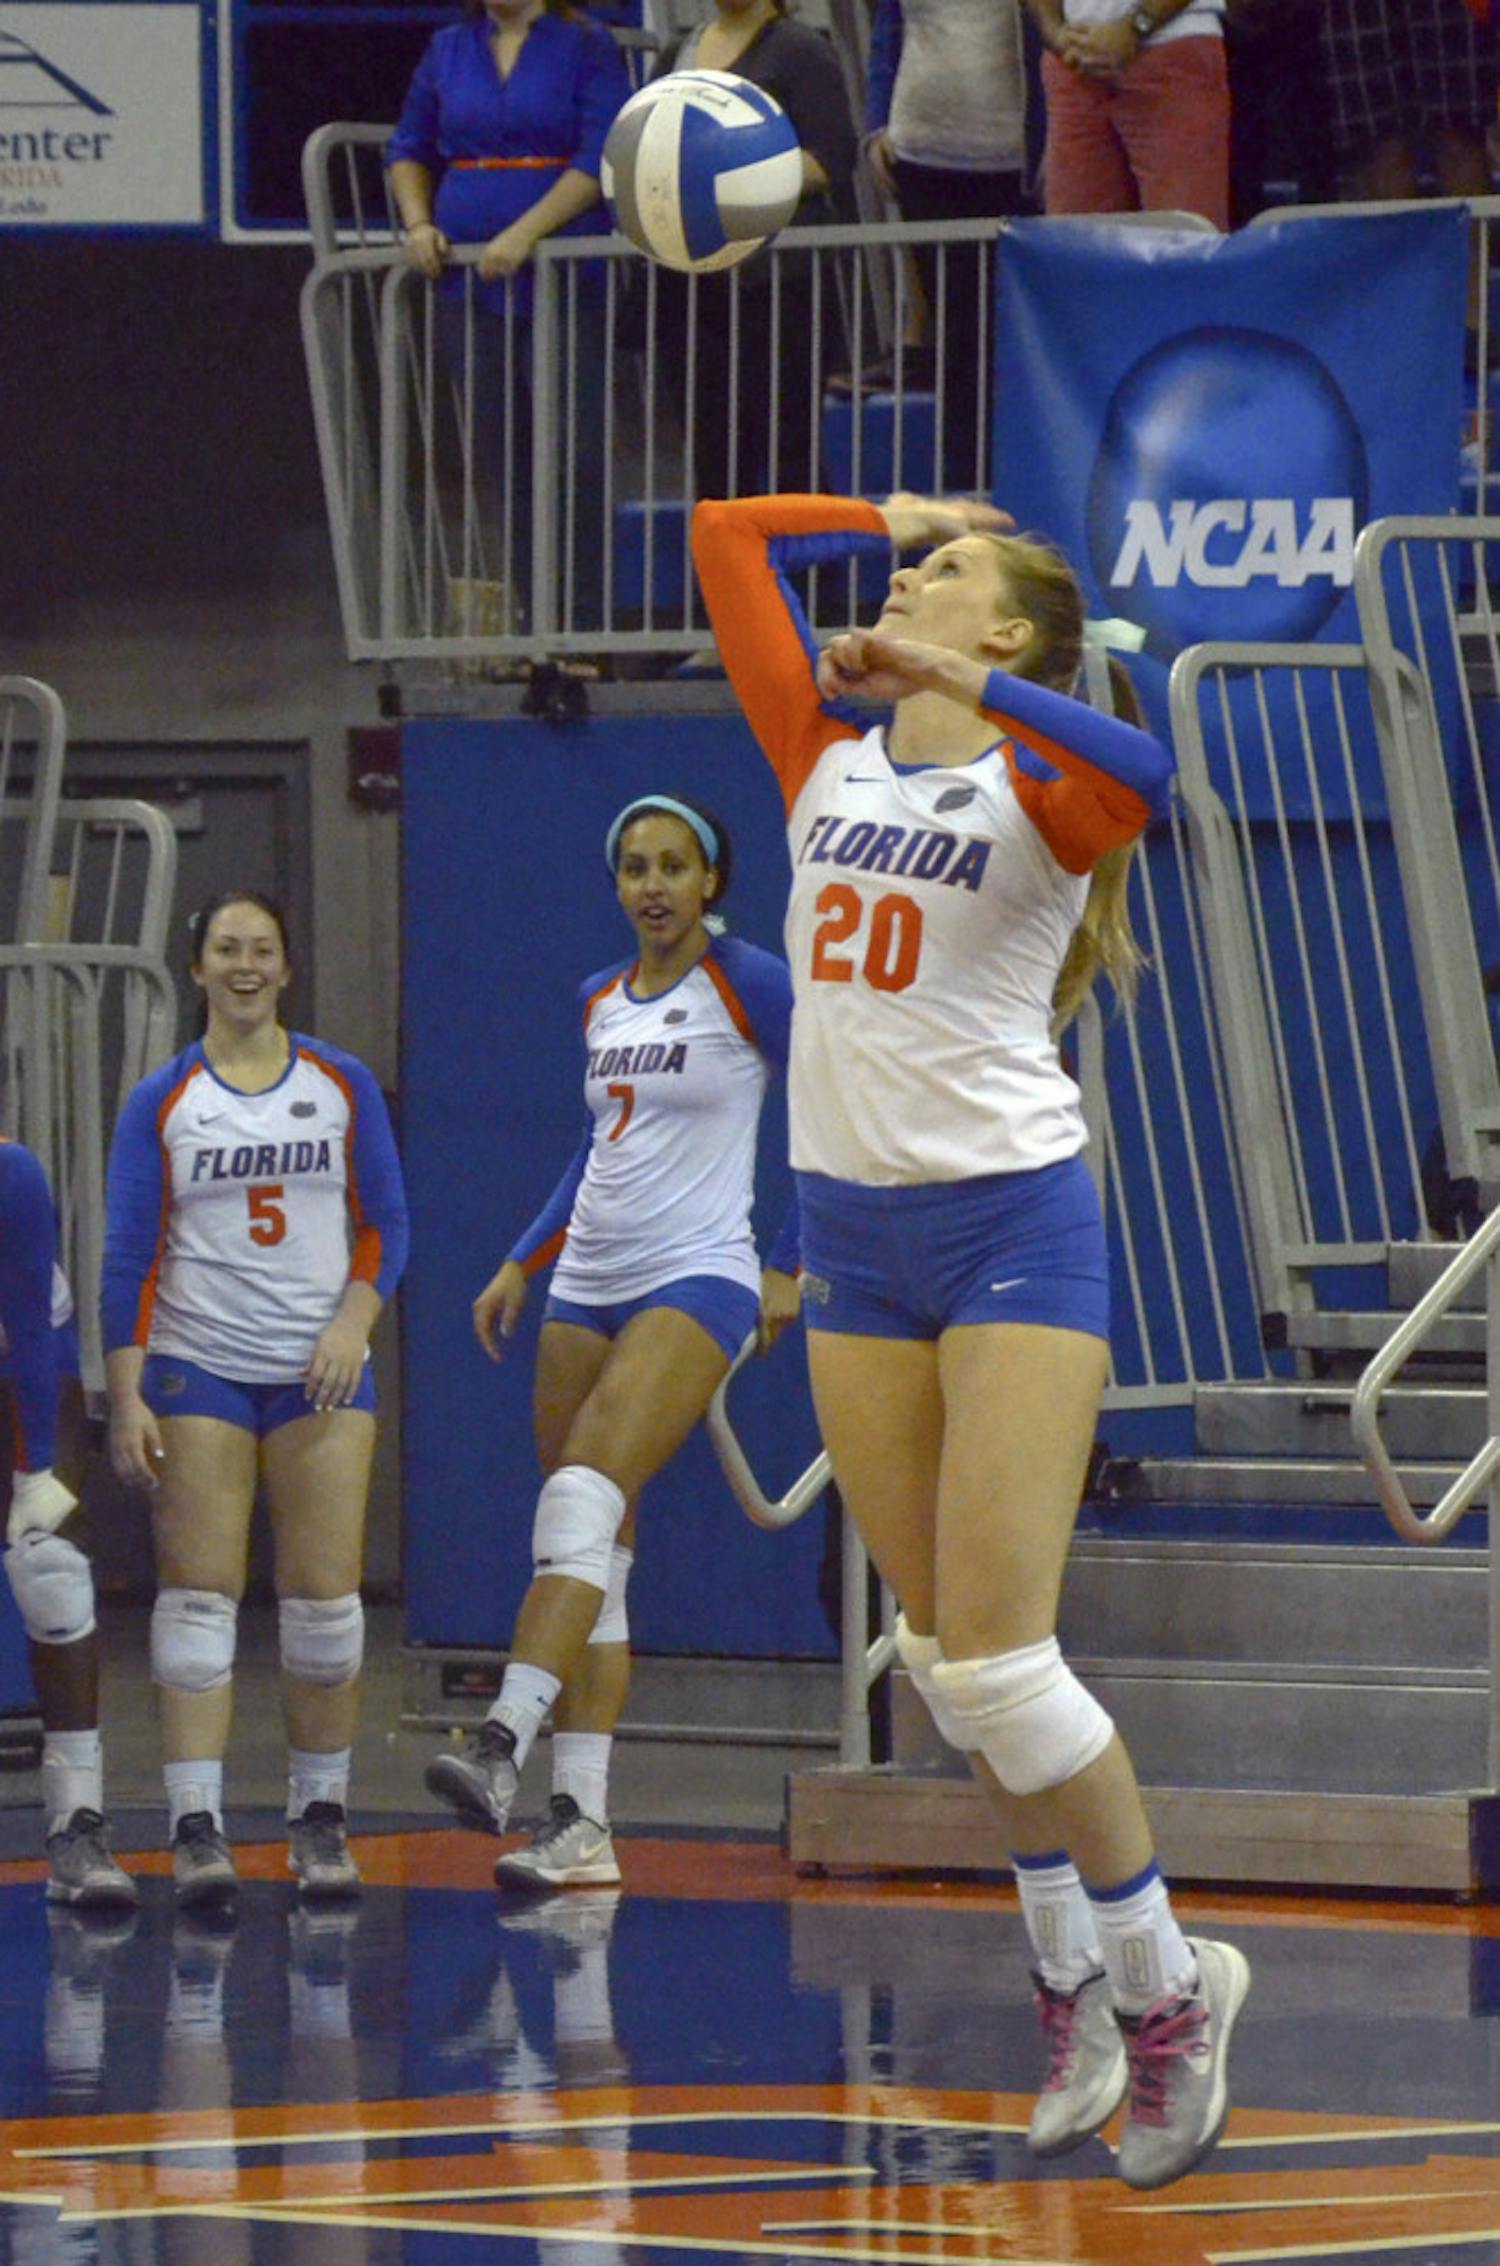 Defensive Specialist Nikki O'Rourke serves during Florida's 3-1 win against Miami in the second round of the NCAA Tournament on Dec. 6 in the O'Connell Center.